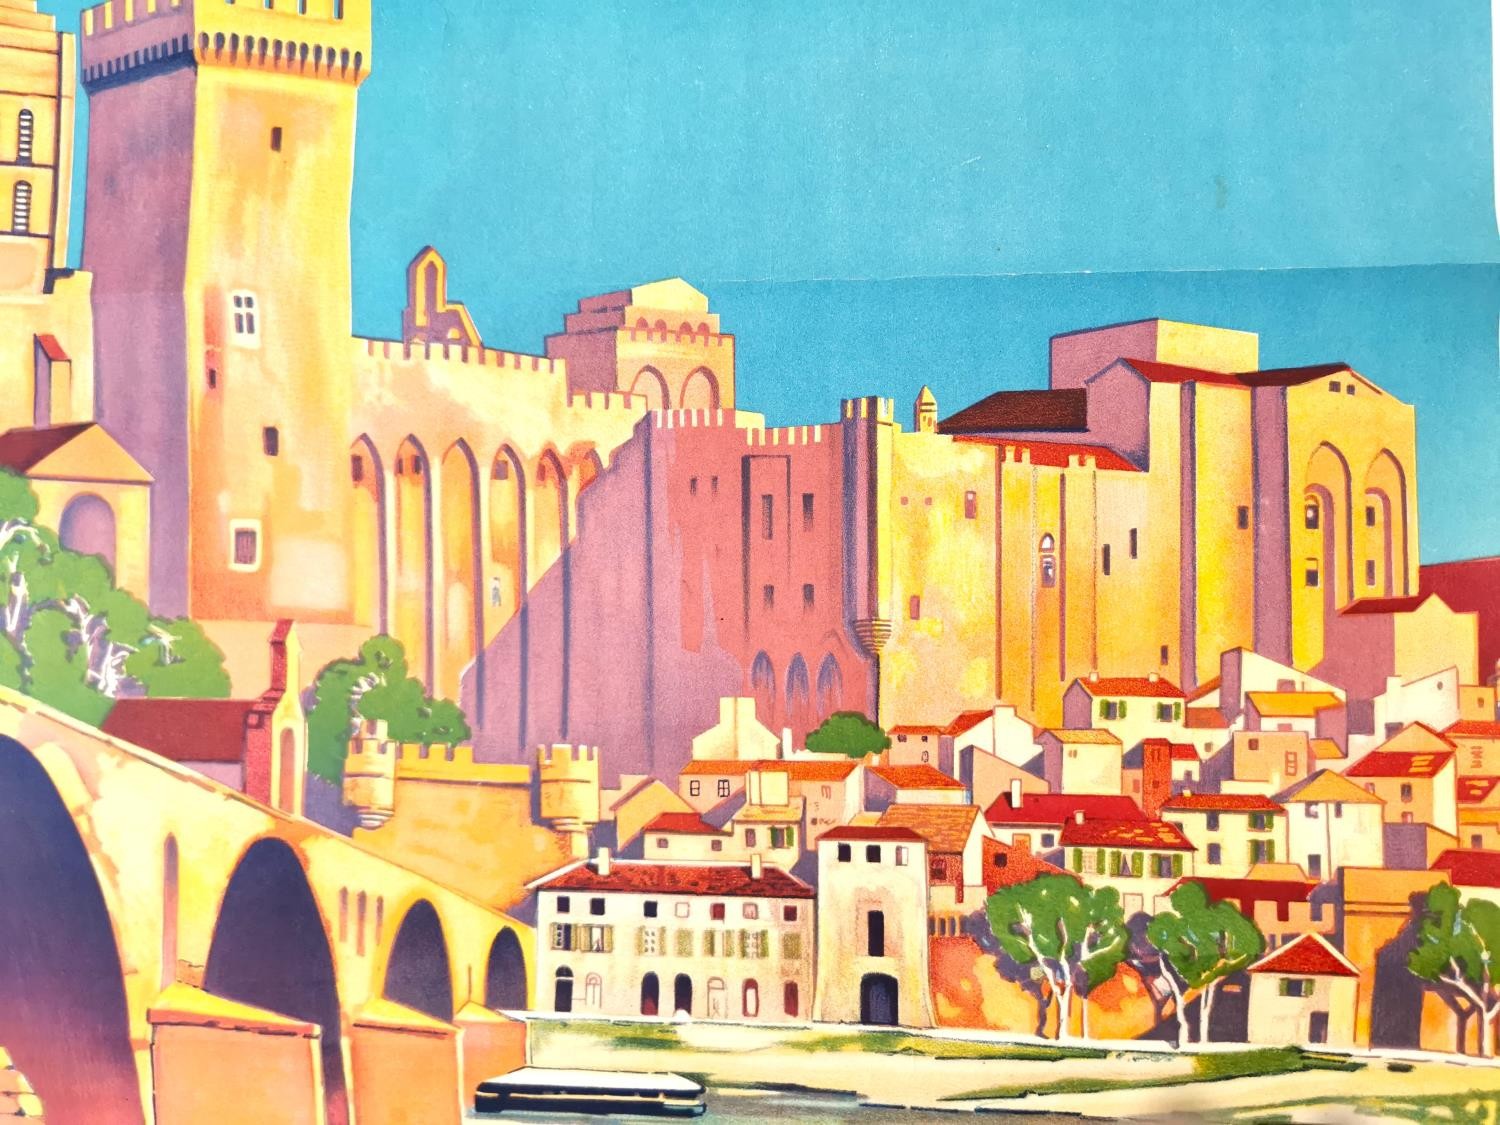 Roger Broders (1883-1953) Avignon, The City of Popes lithographic poster, 1921. H.90 W.60cm - Image 6 of 10